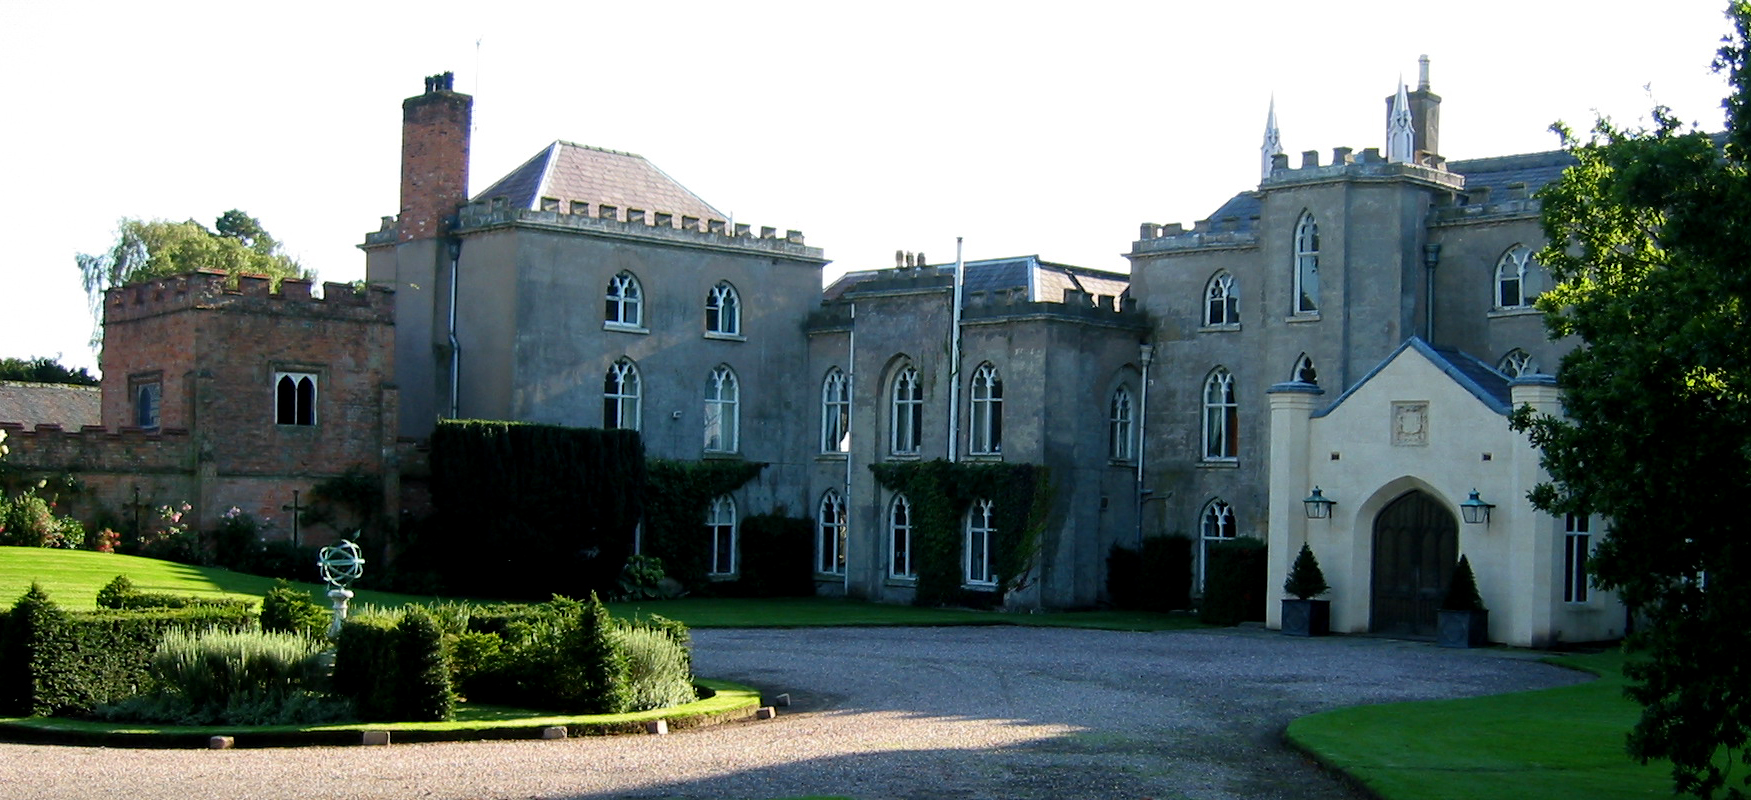 Combermere Abbey